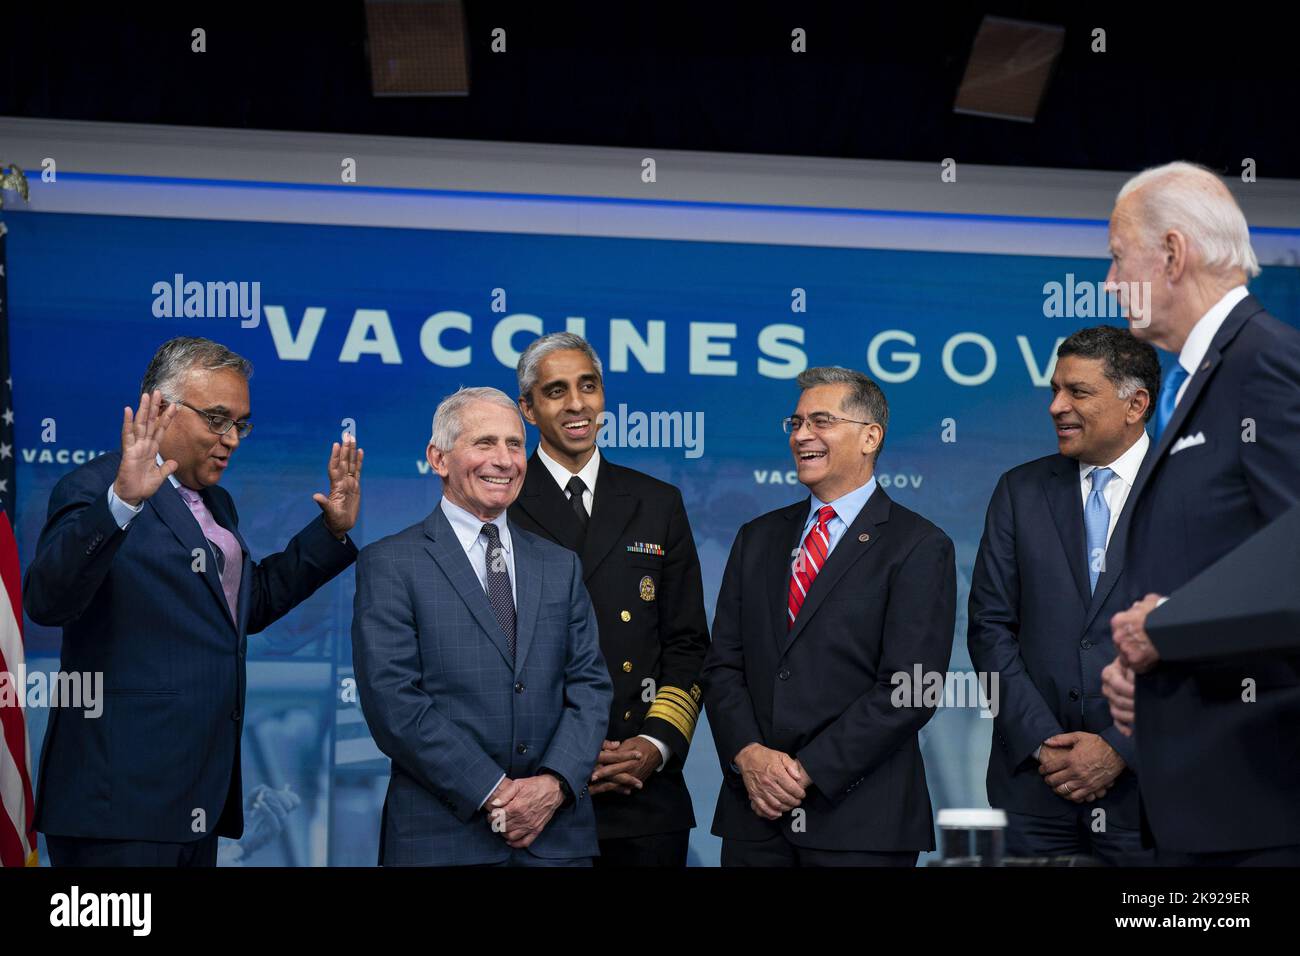 Ashish Jha, White House Covid-19 response coordinator, from left, Anthony Fauci, director of the National Institute of Allergy and Infectious Diseases, Vivek Murthy, US surgeon general, Xavier Becerra, secretary of Health and Human Services (HHS), and Vivek Sankaran, chief executive officer of Albertsons Companies, Inc., laugh following being asked by US President Joe Biden if they were getting their shot today, before Biden received a booster dose of the Covid-19 vaccine targeting the Omicron BA.4/BA.5 subvariants in the Eisenhower Executive Office Building in Washington, DC, on Tuesday, Octo Stock Photo